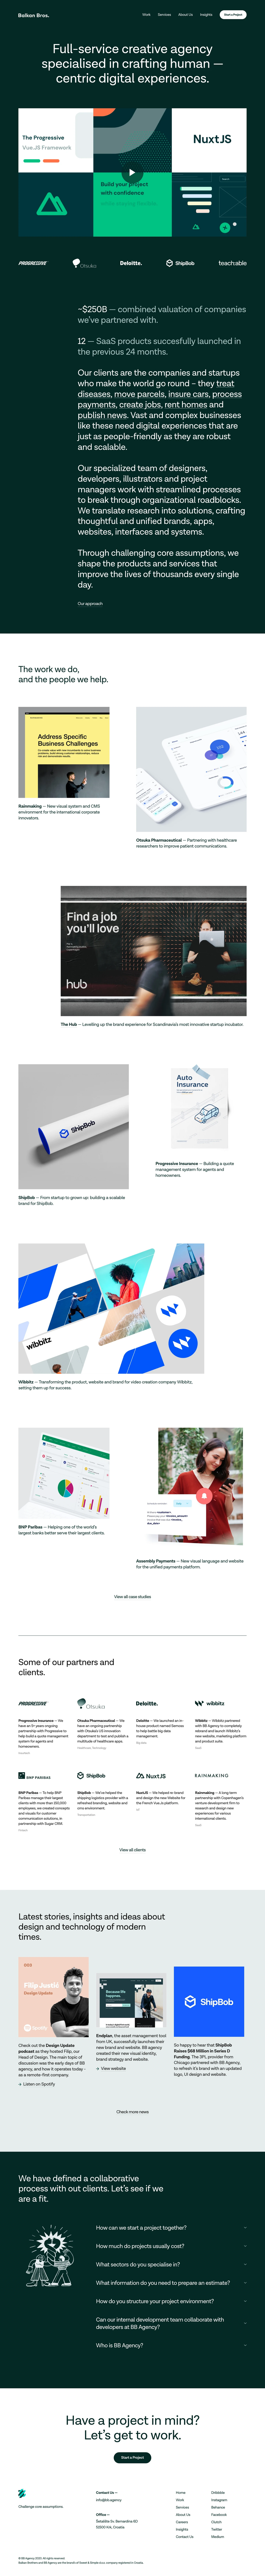 BB Agency Landing Page Example: We are a full-service creative agency specialized in crafting human-centric digital experiences. Our process includes services such as branding, user experience and user interface design with frontend development and cms integration.